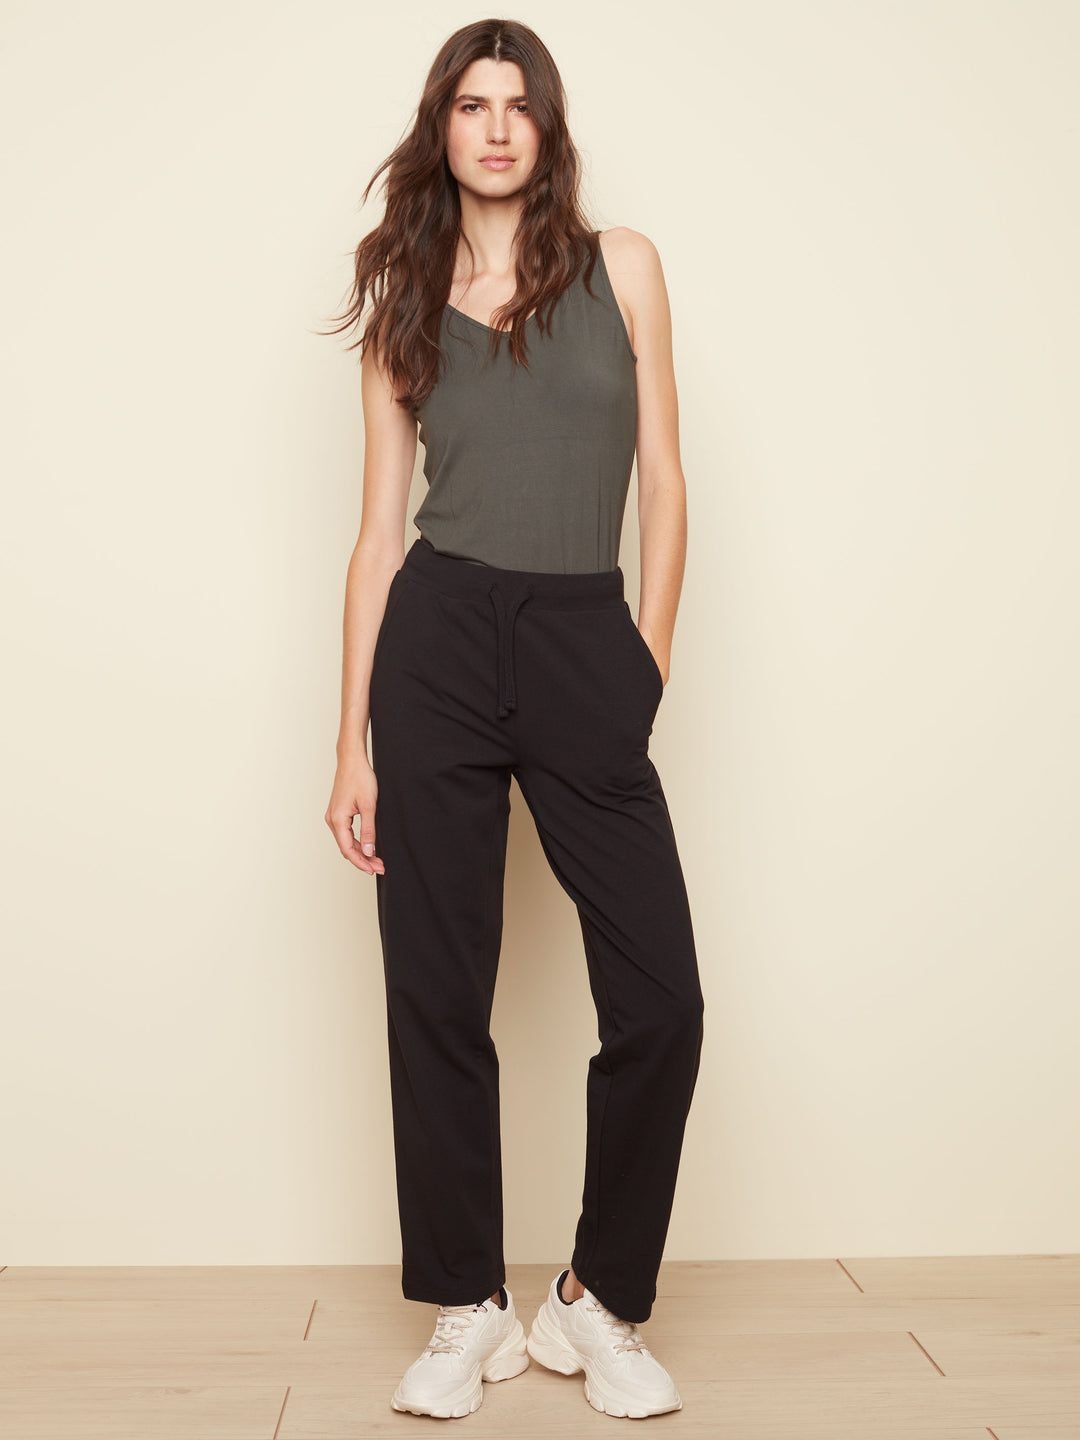 Pull on drawstring french terry pants